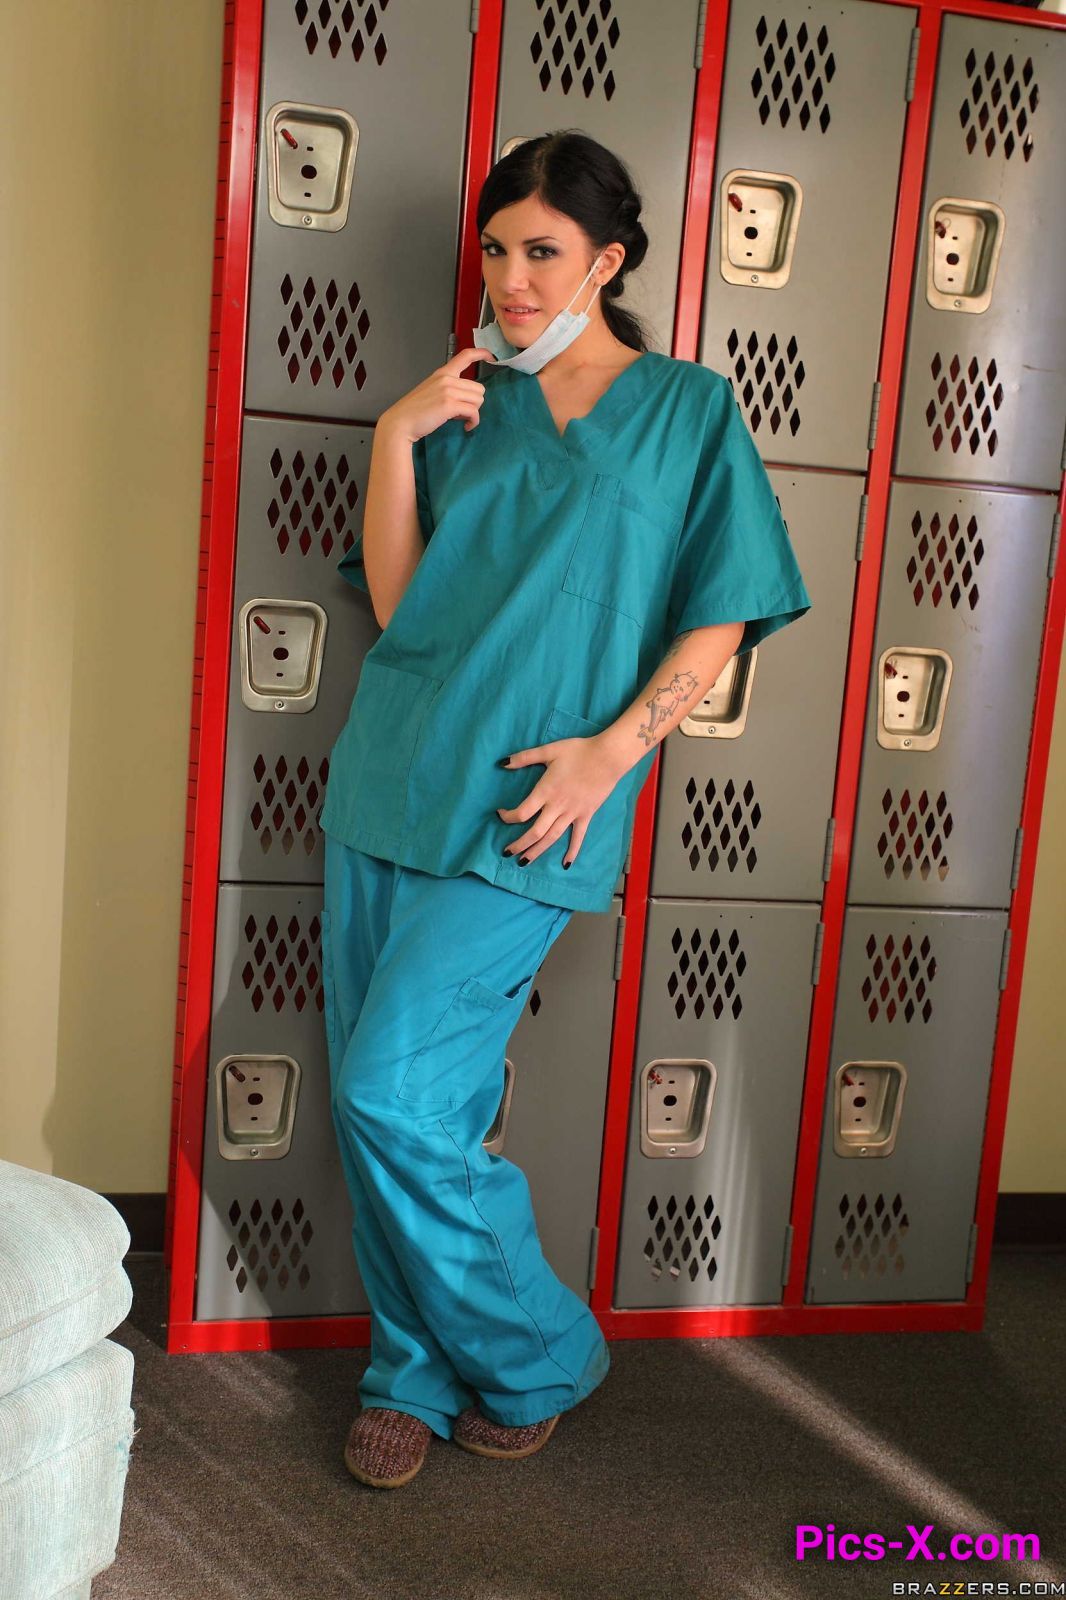 Sexy Doctor Takes Advantage Of Male Nurse - Doctor Adventures - Image 1